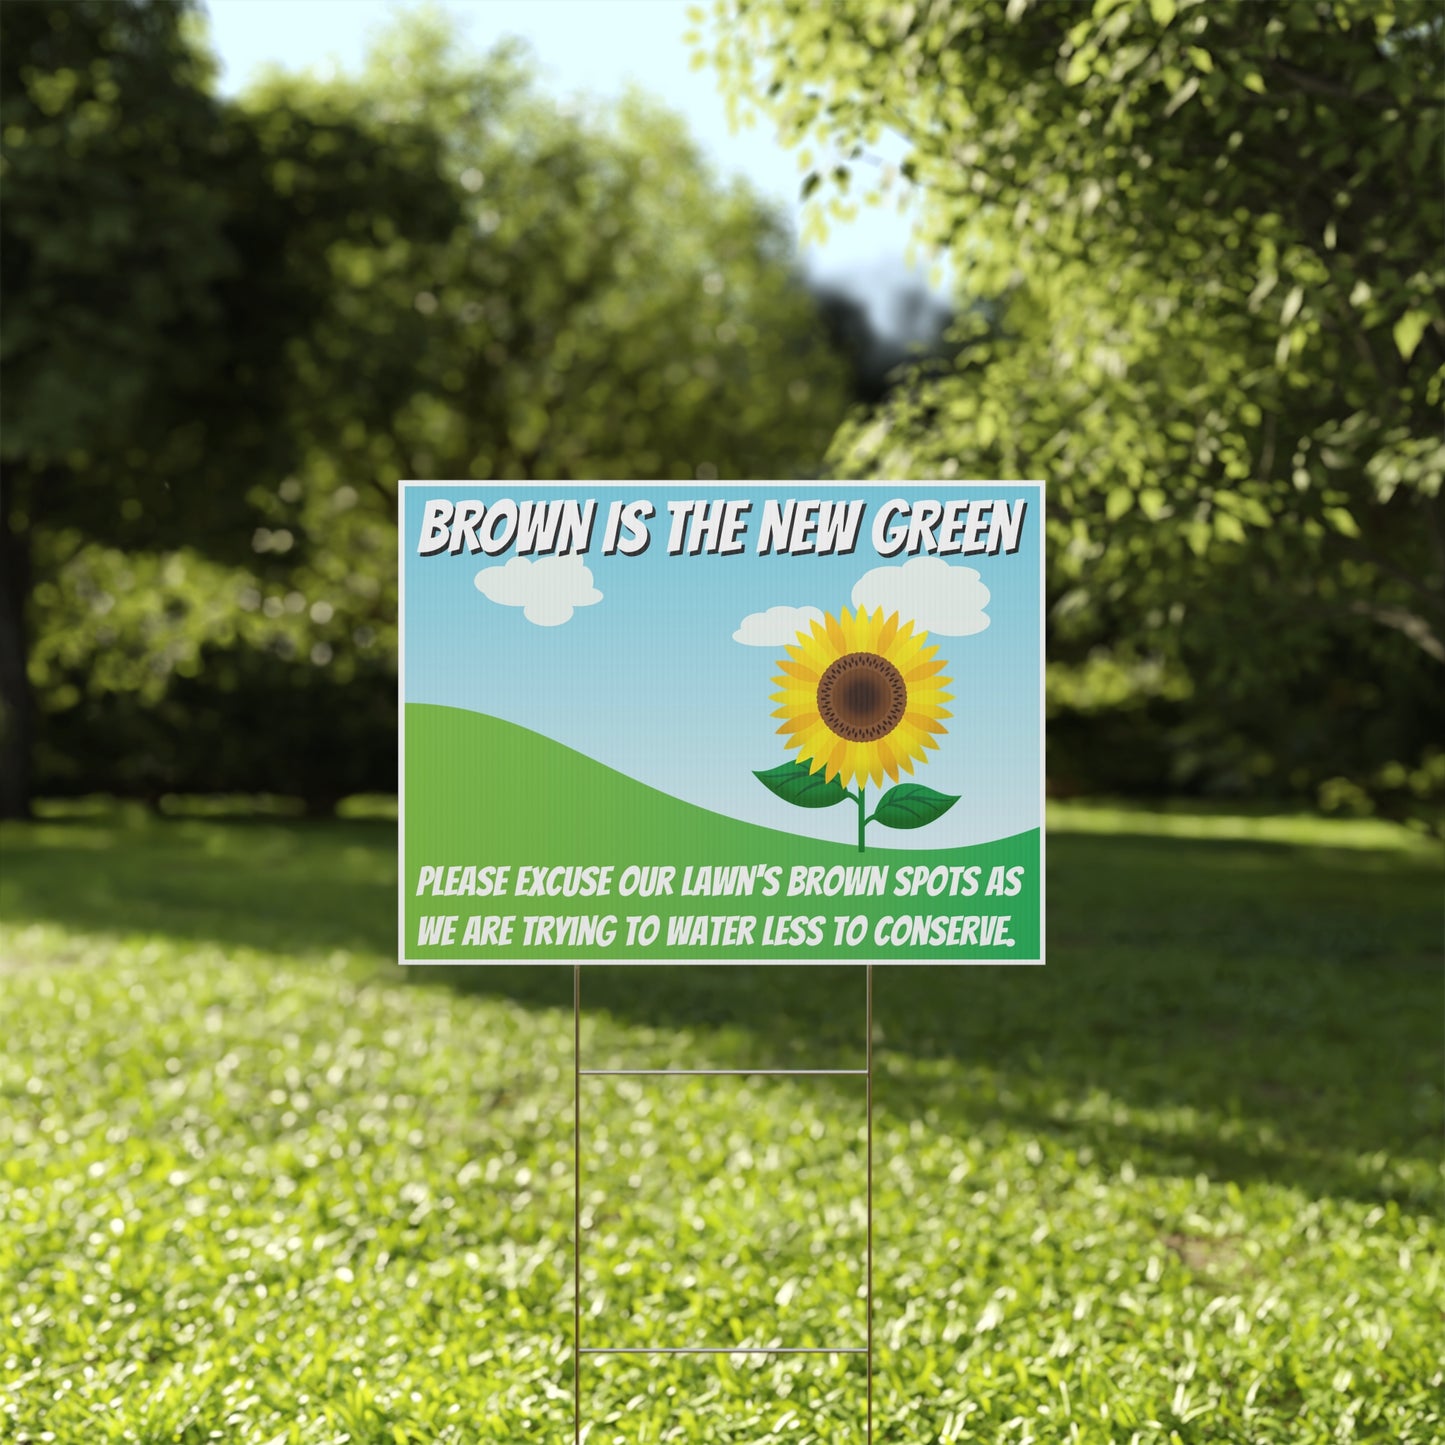 Conserve Water, Save Water, Brown is the New Green, Yard Sign, 18x12, 24x18, 36x24, v1